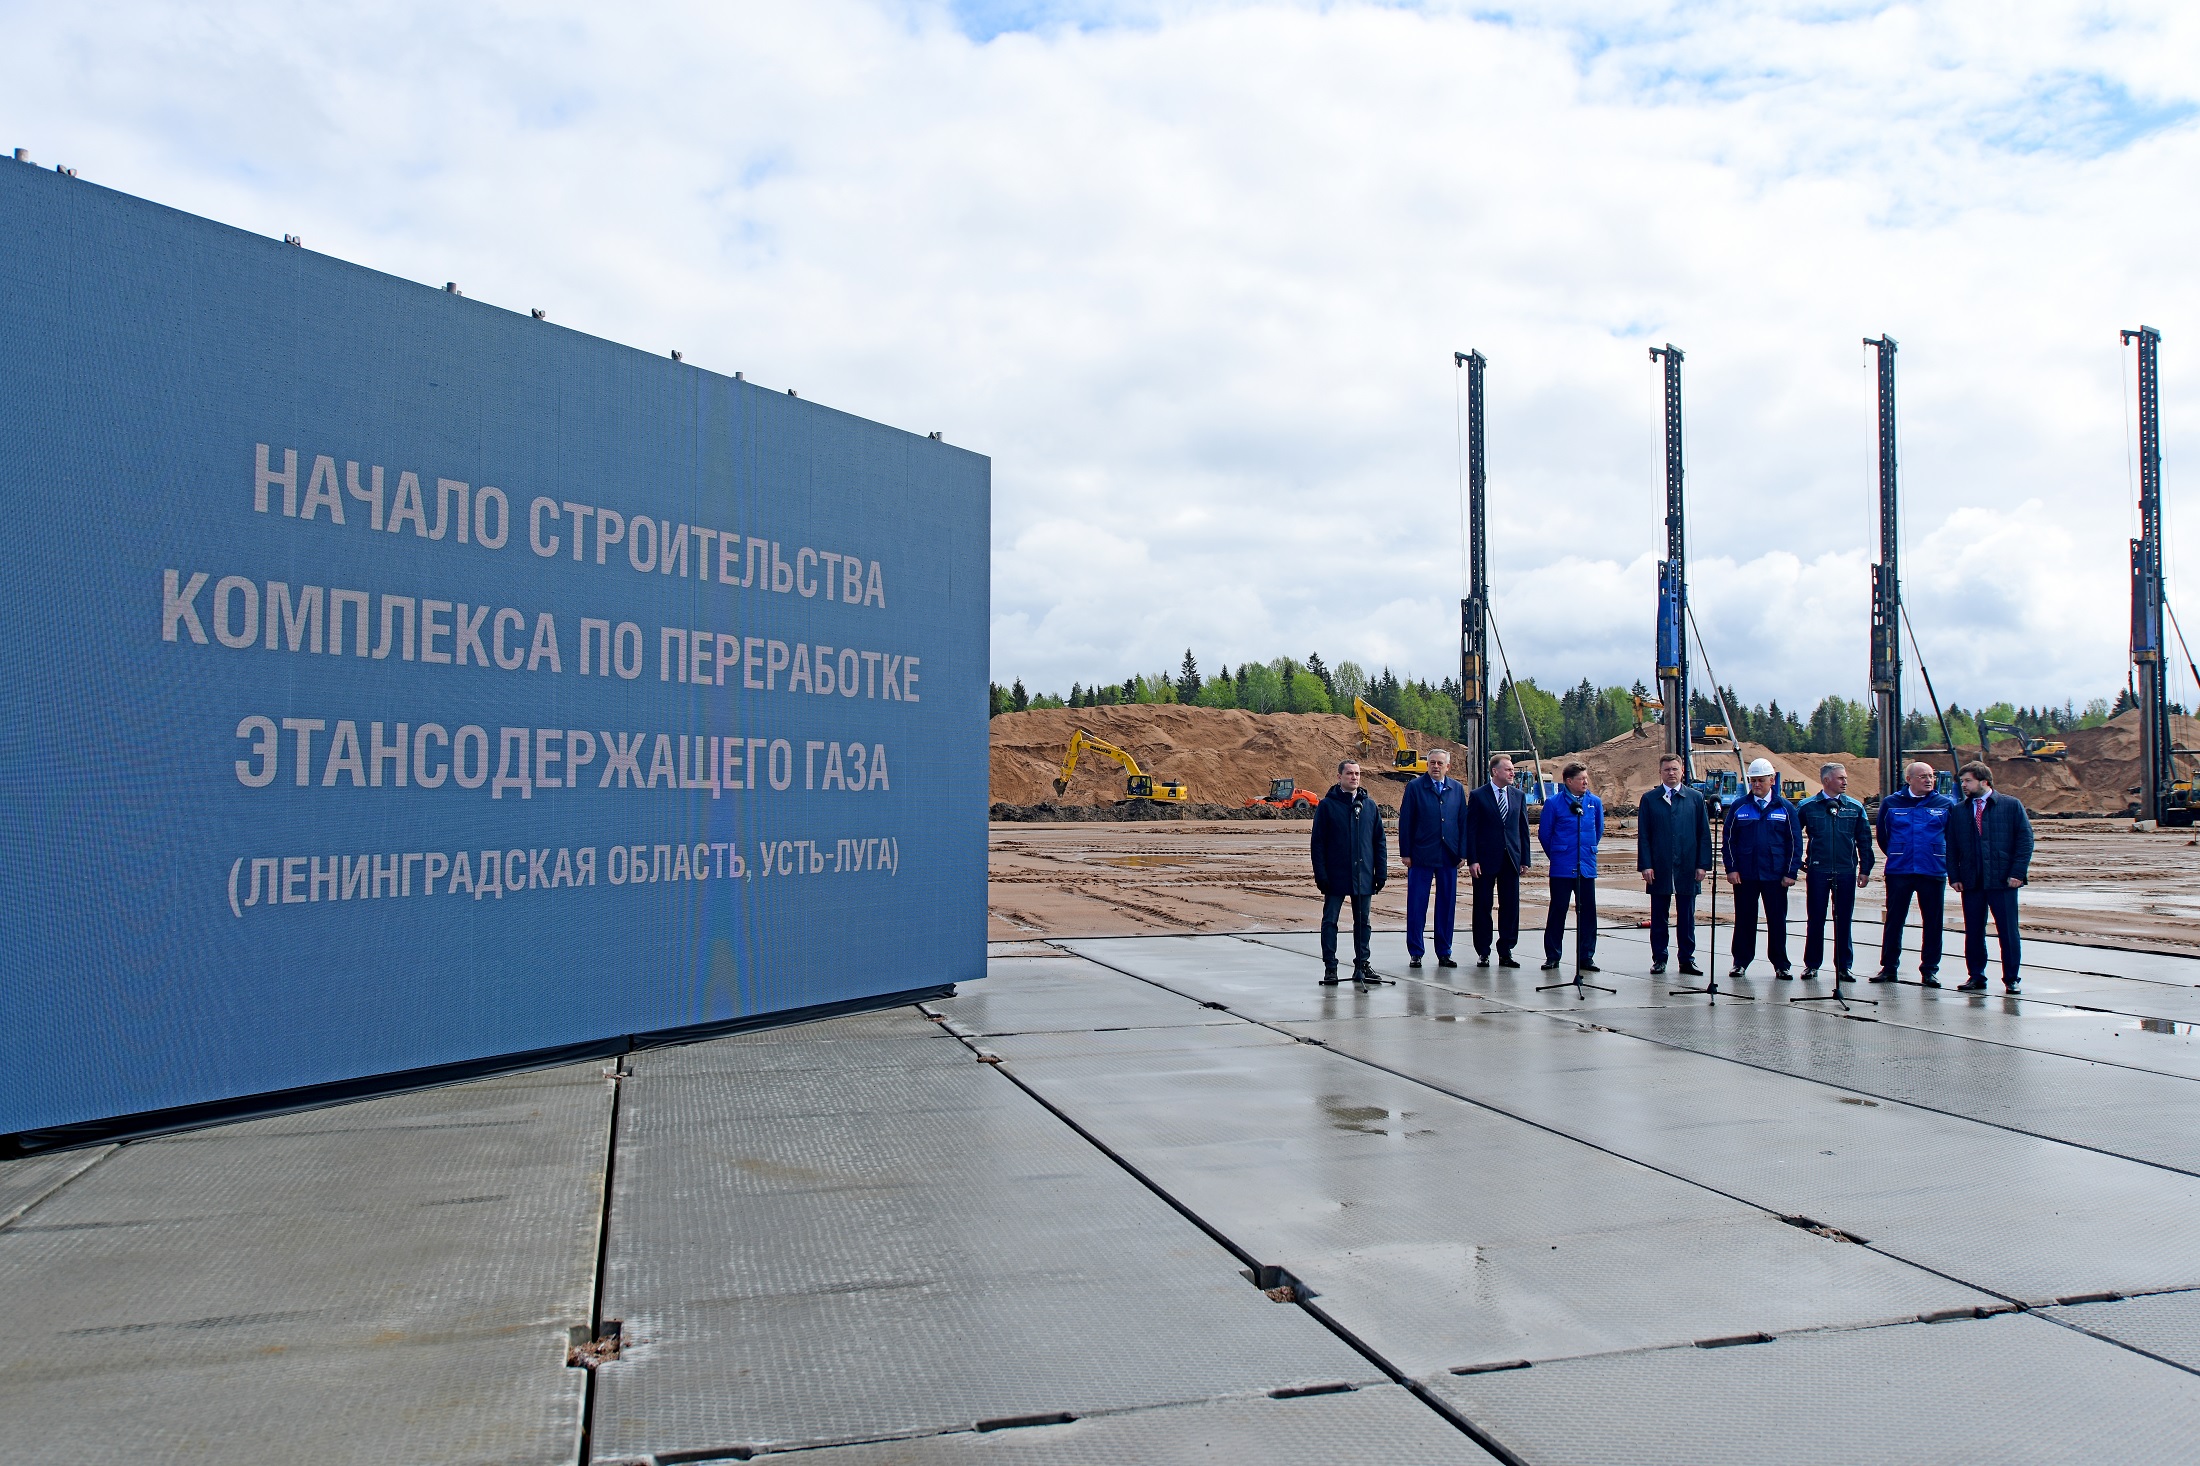 Gazprom starts construction of gas complex at Ust-Luga